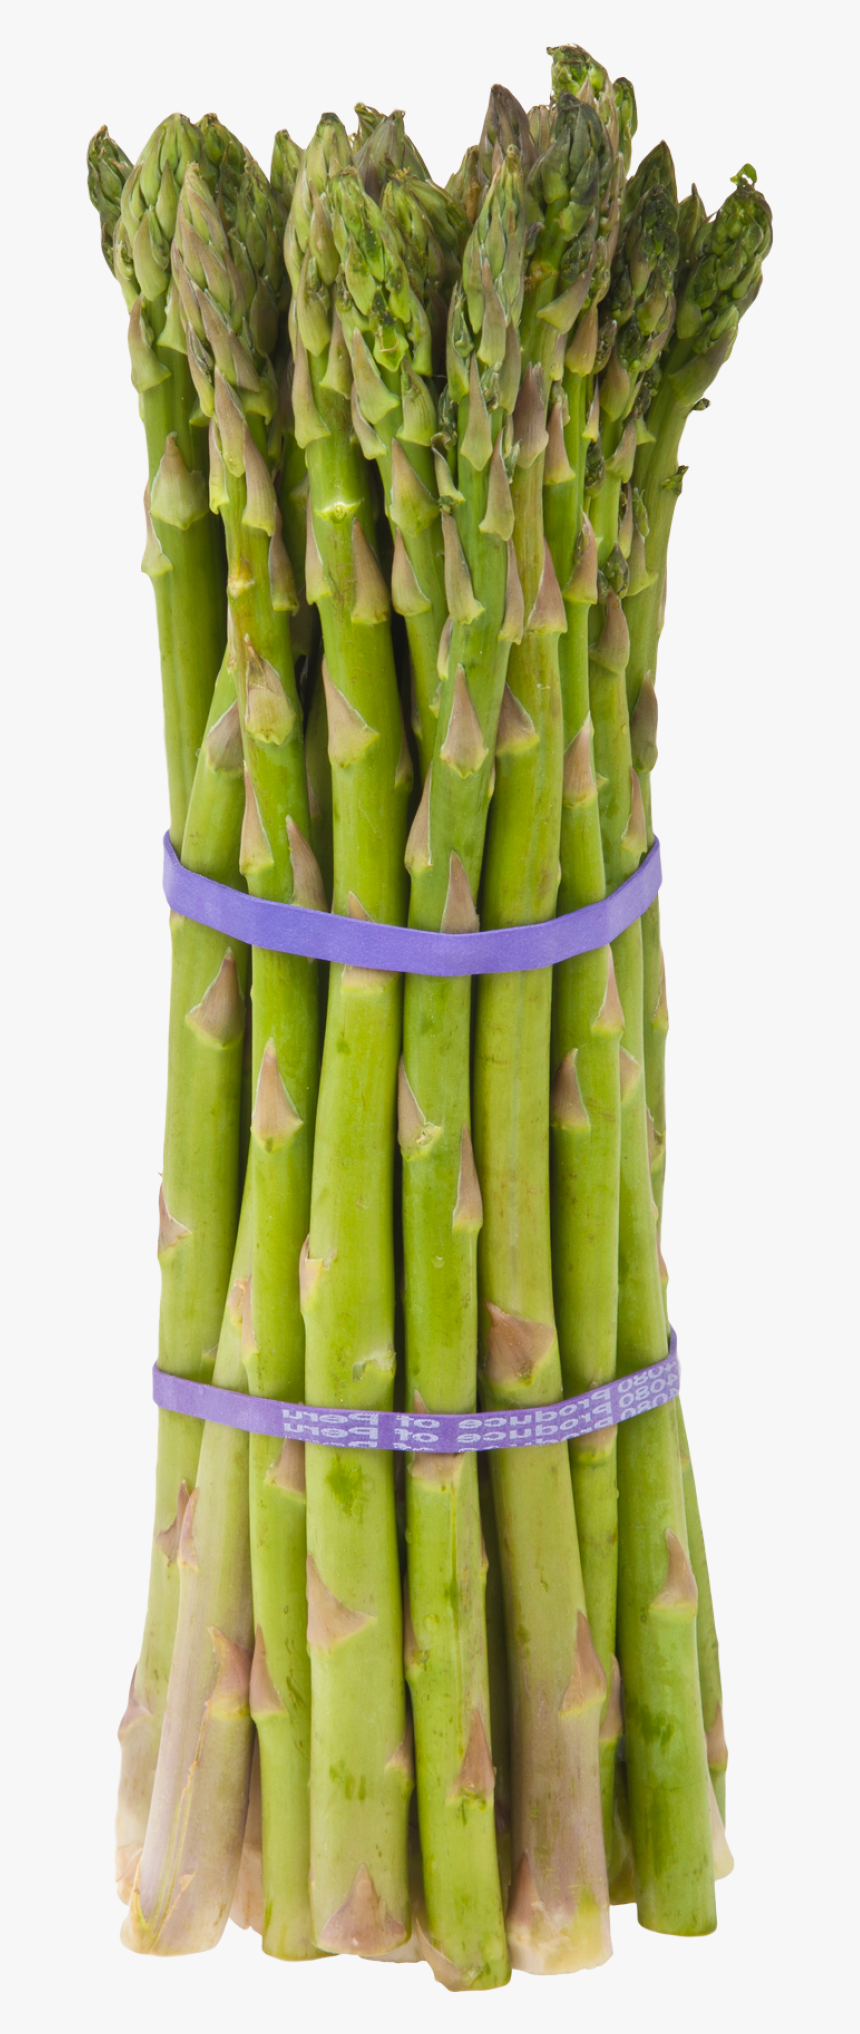 Asparagus Png Image - Asparagus Meaning In Bengali, Transparent Png, Free Download